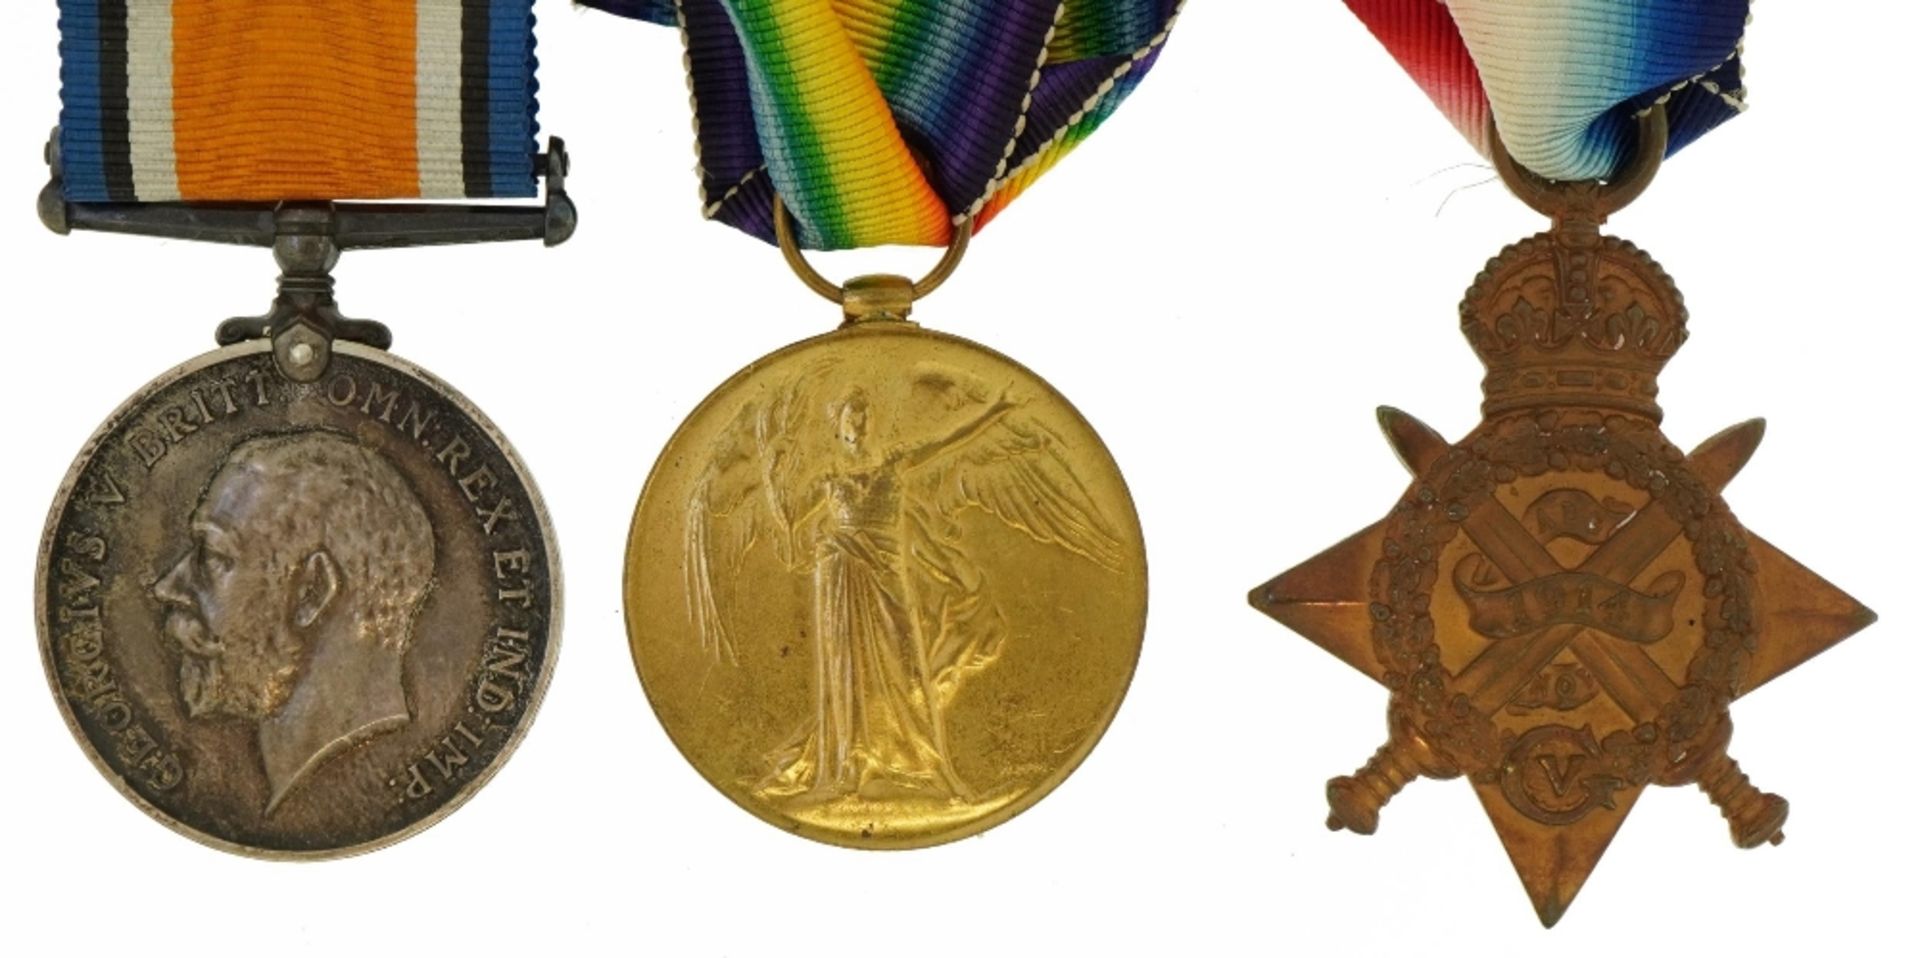 British military World War I trio with Mons star awarded to L-10013PTE.H.M.A.DYER.E.KENTR.,